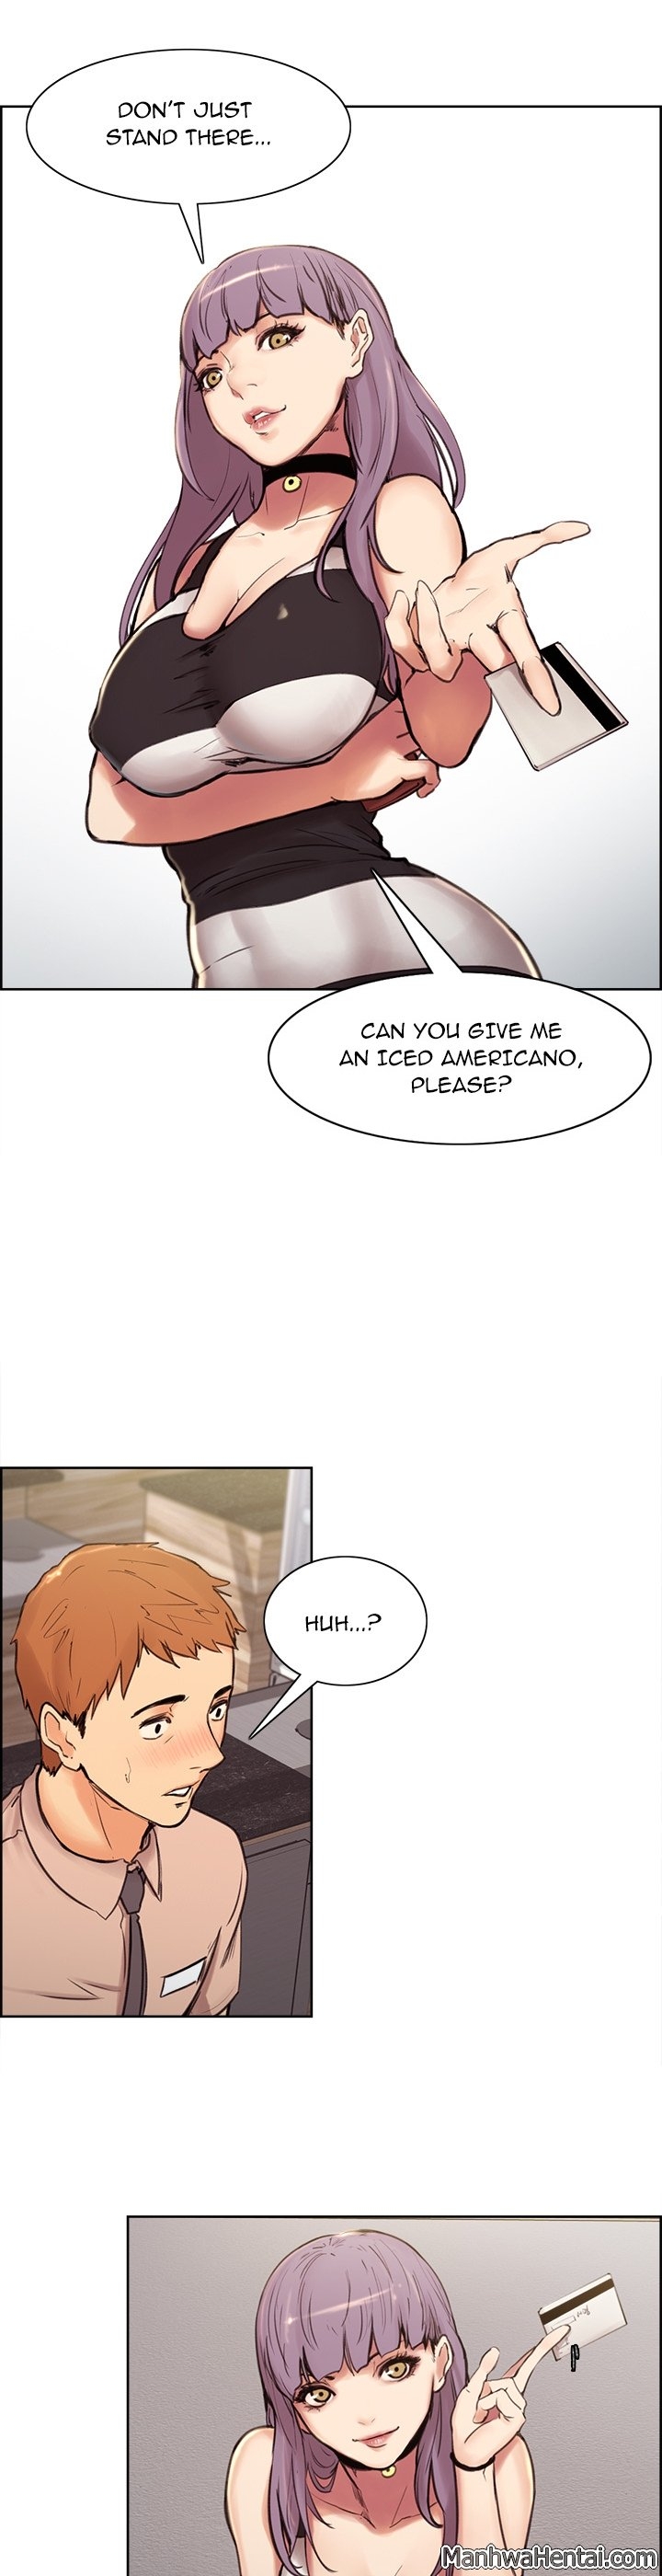 [Serious] The Sharehouse Ch. 1-11 [English] 7